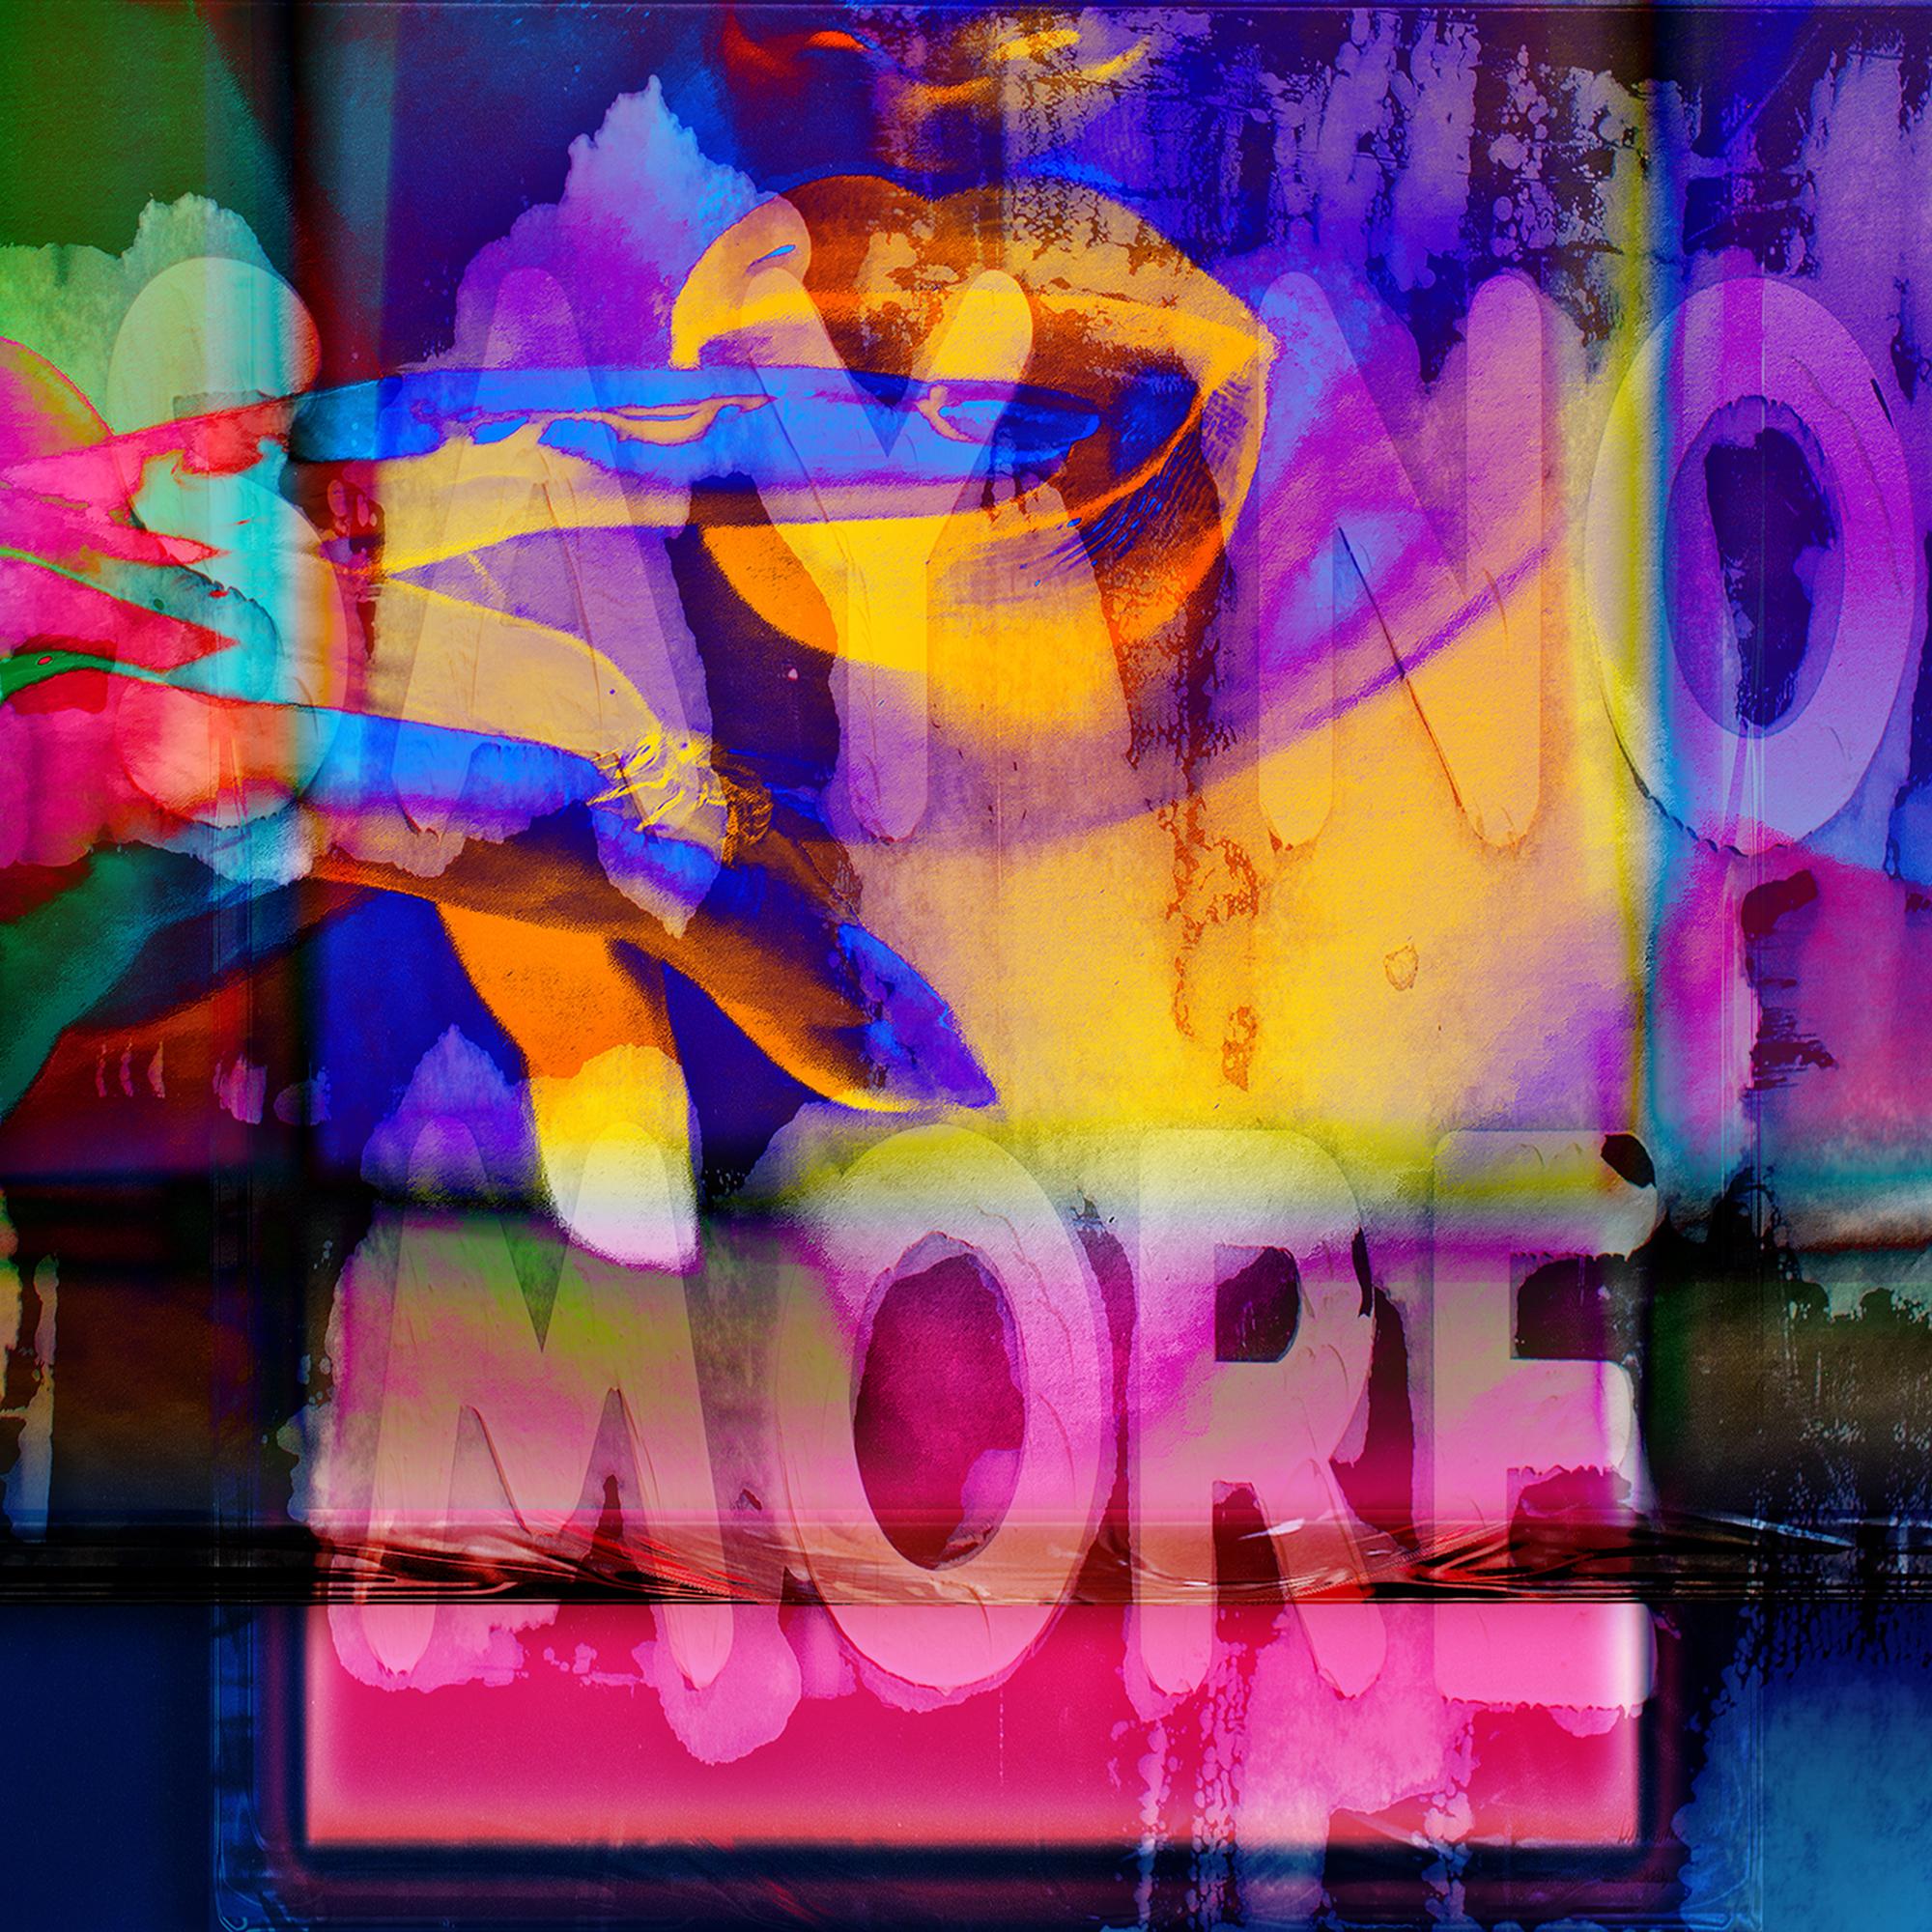 'Framed Color Face More And More' Digital Painting, Lamda Print - Photograph by Jens-Christian Wittig